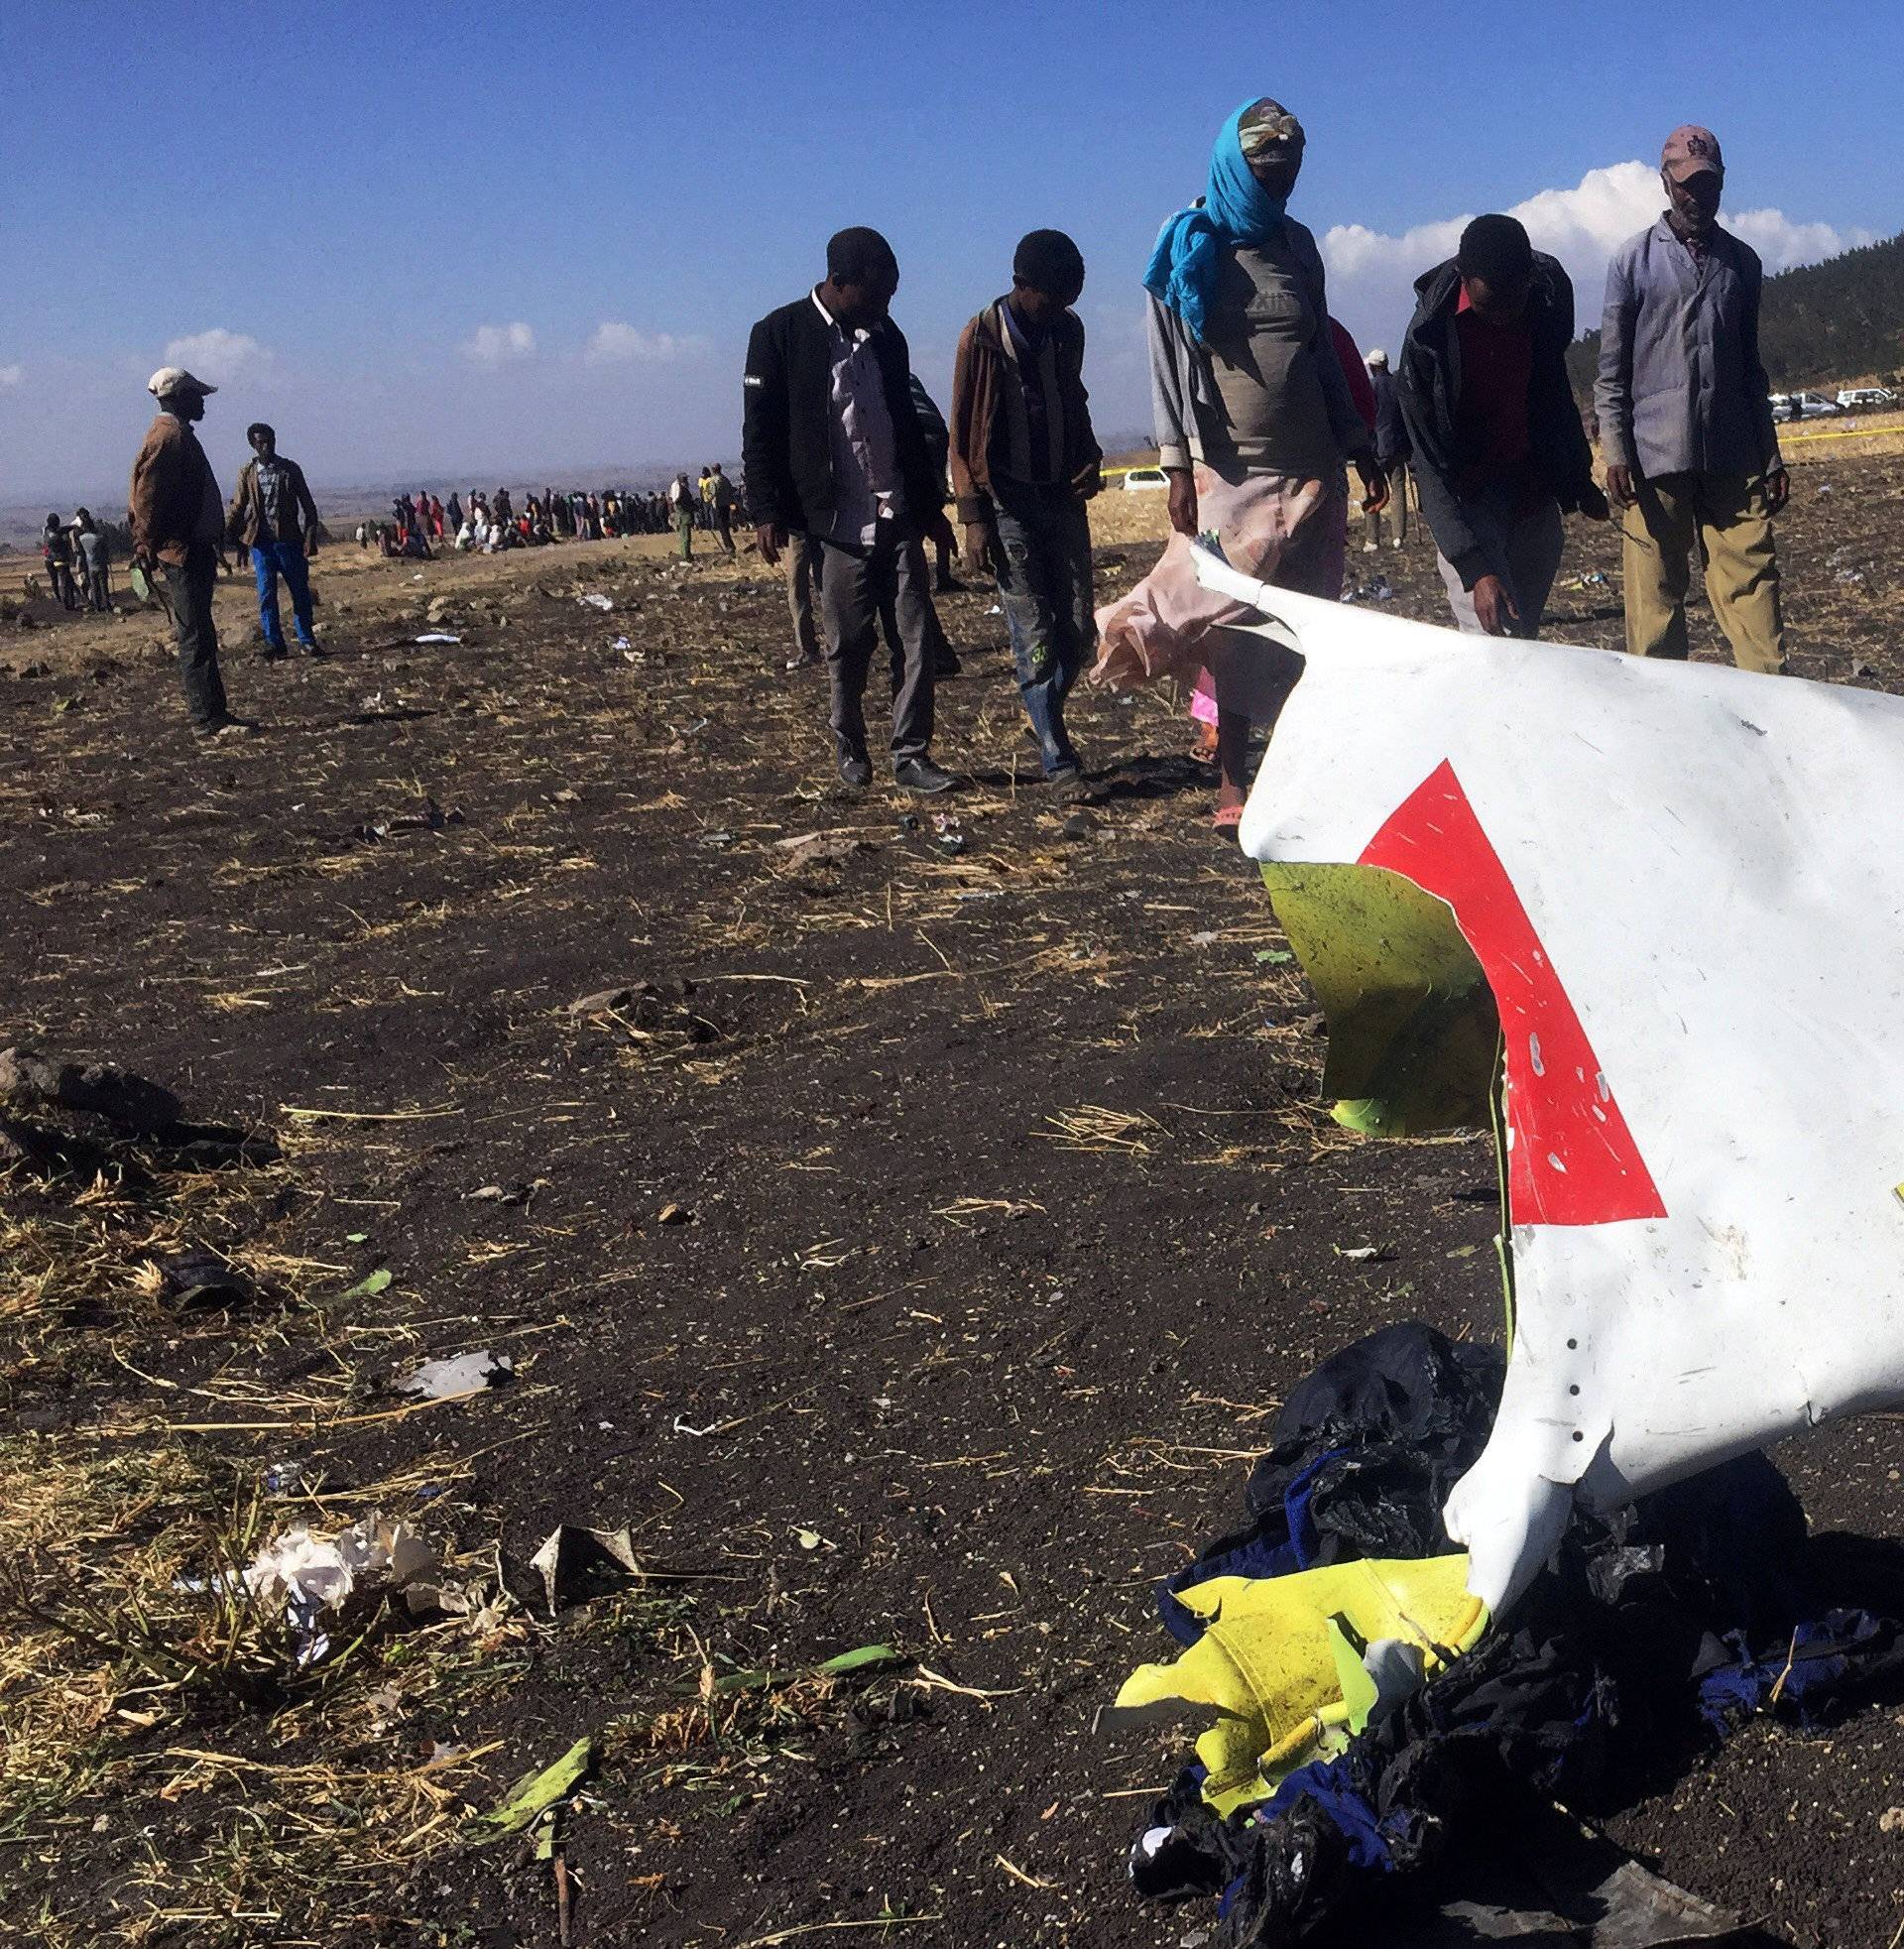 People walk past a part of the wreckage at the scene of the Ethiopian Airlines Flight ET 302 plane crash, near the town of Bishoftu, southeast of Addis Ababa